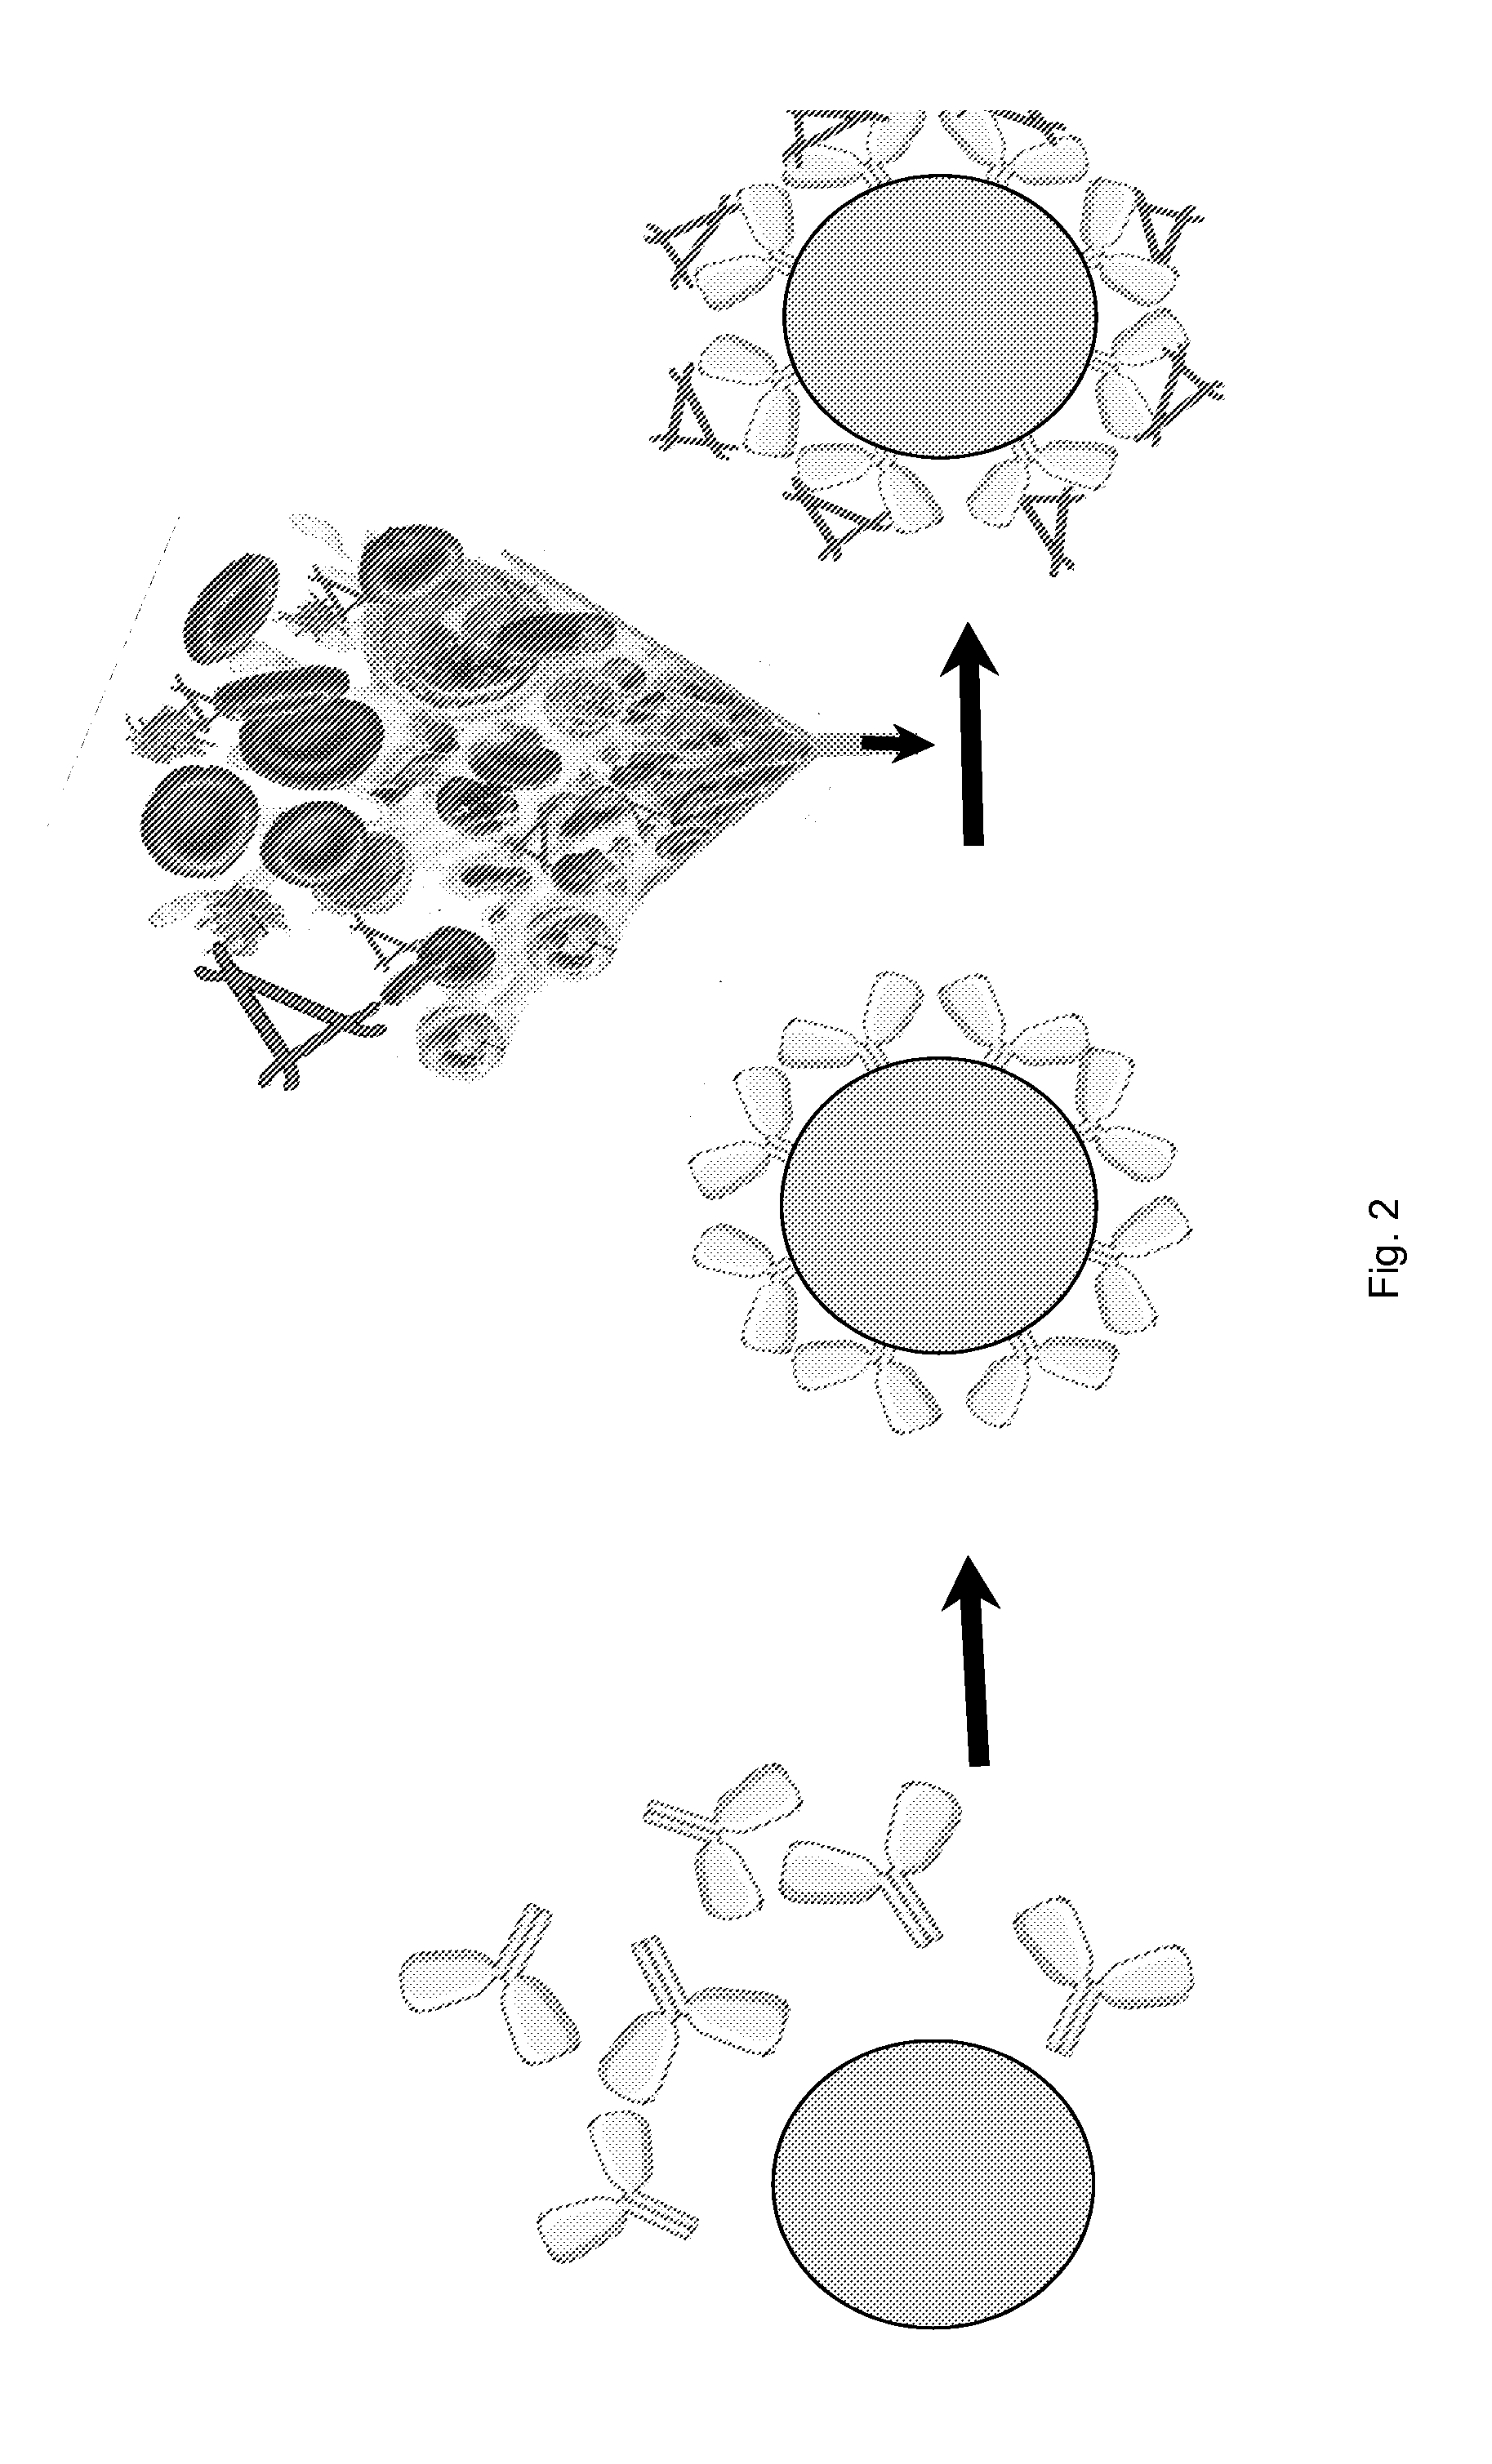 Device and method for inhibiting complement activation